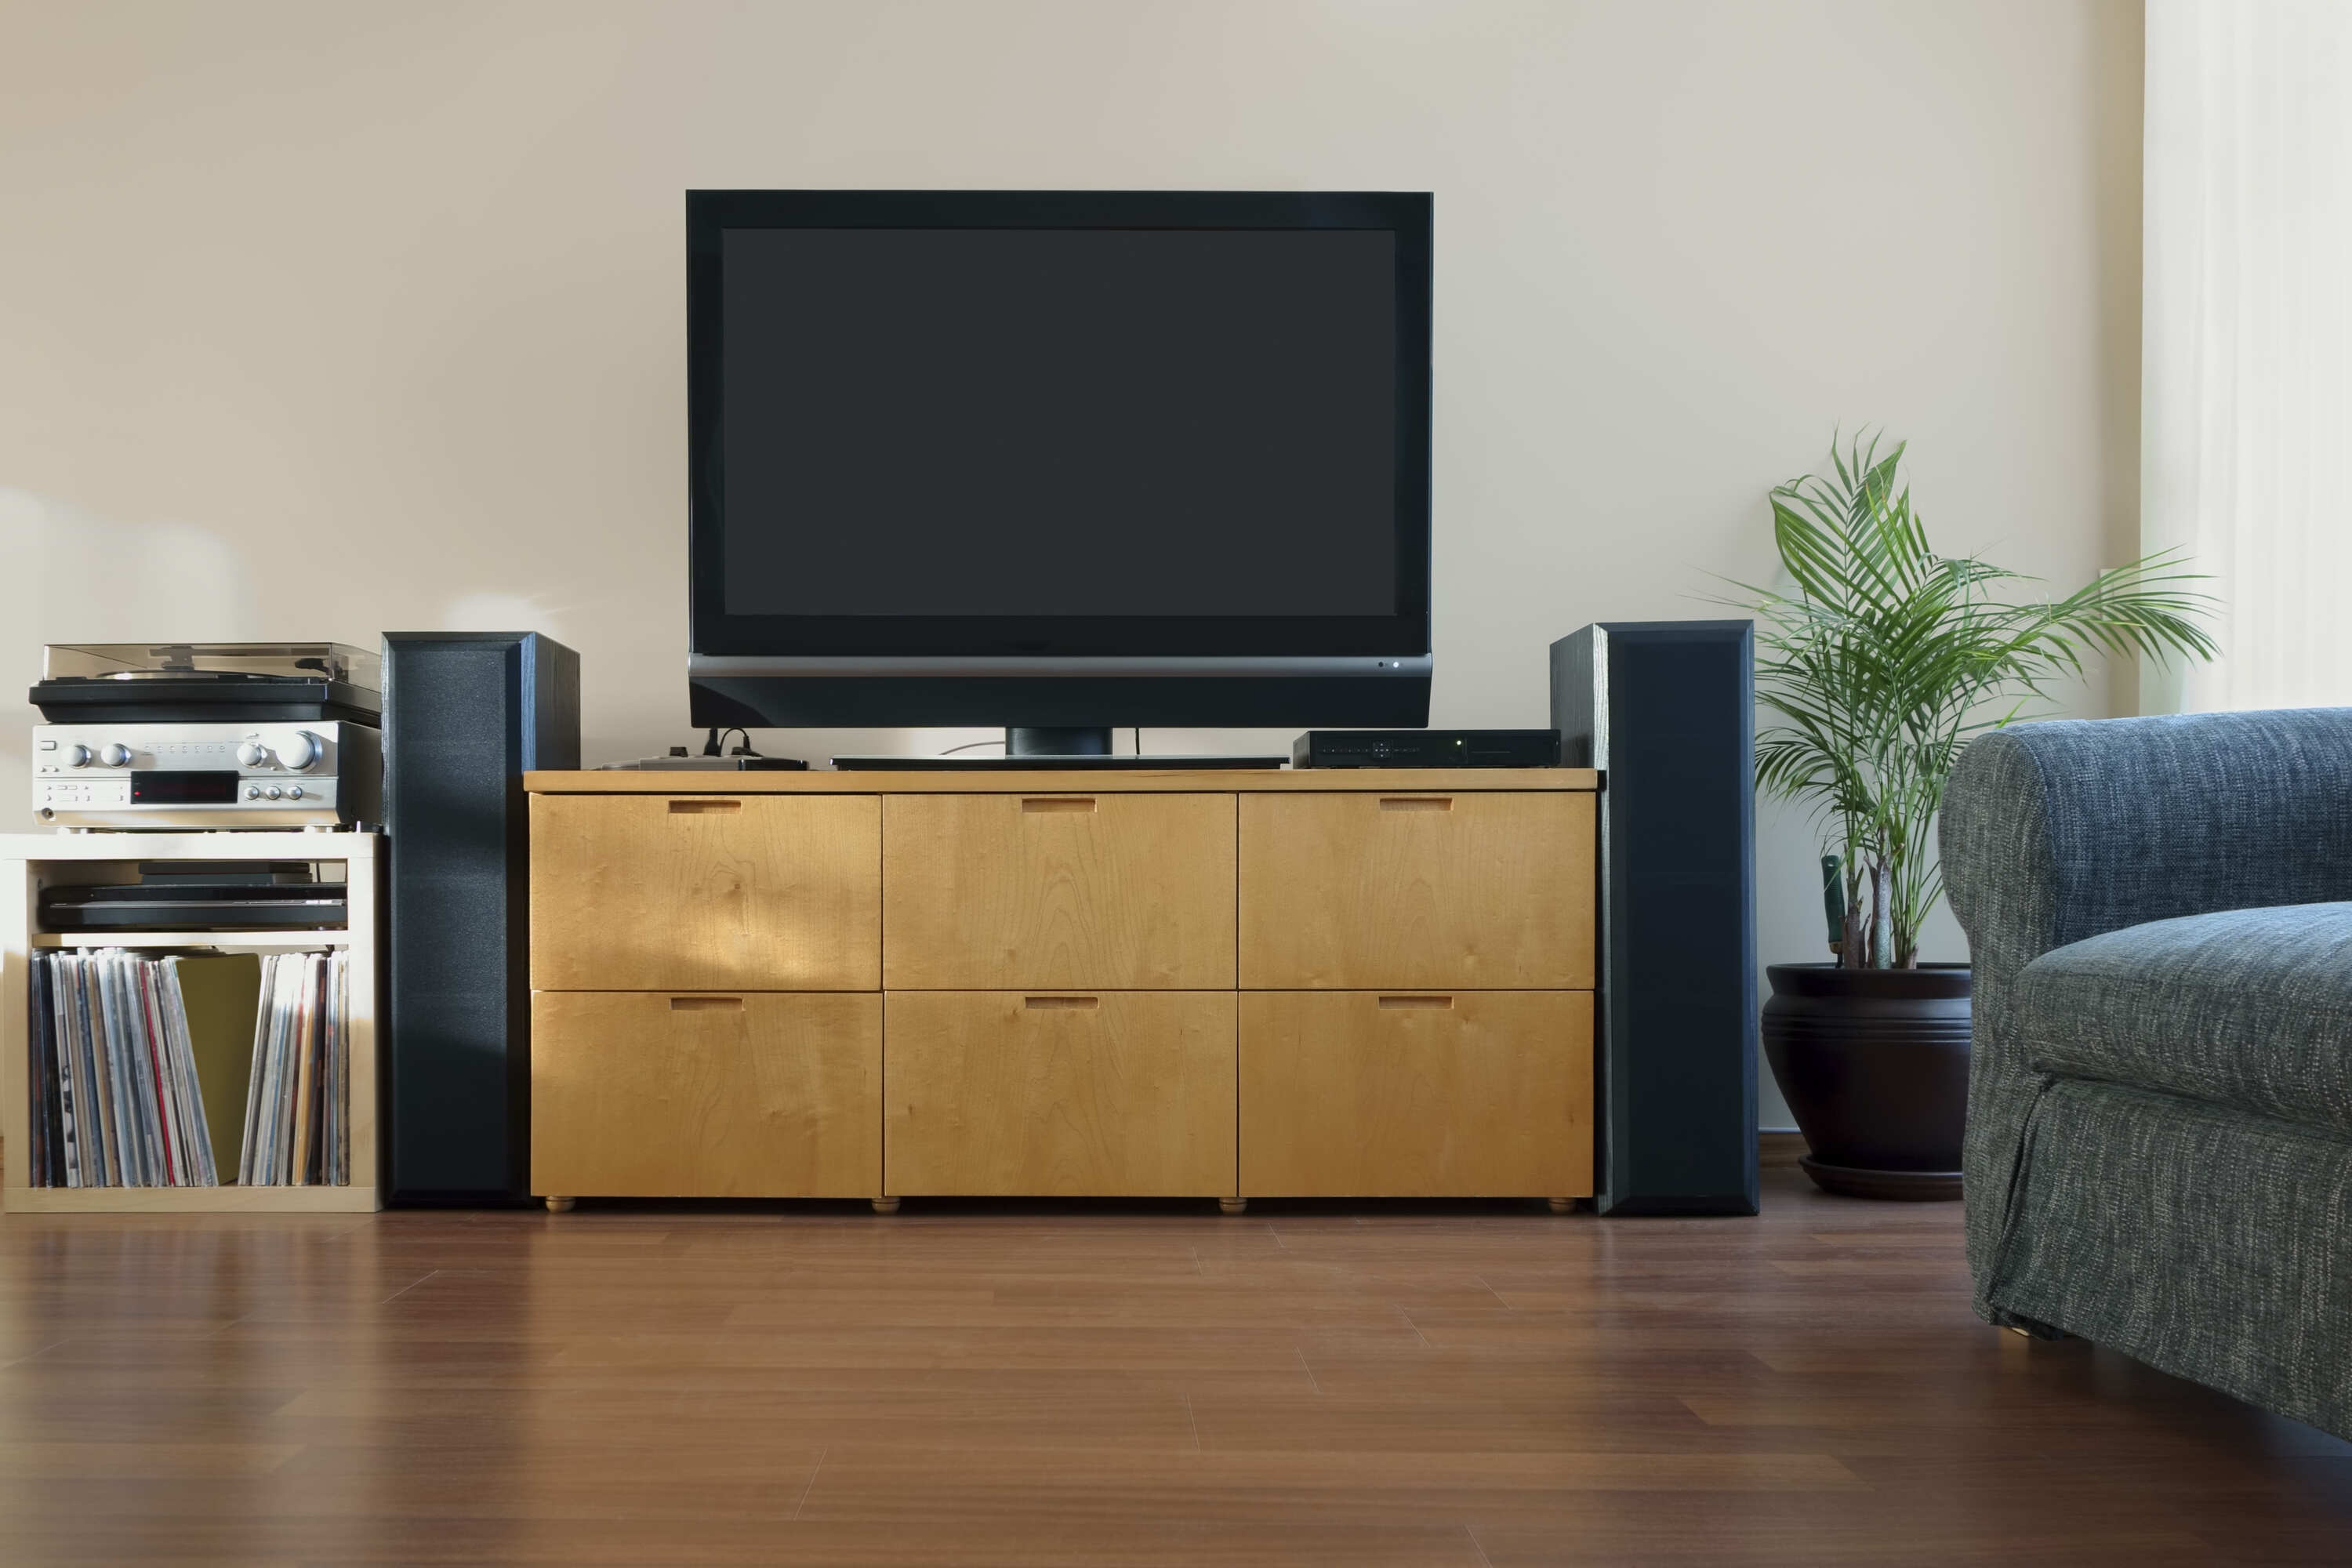 How To Connect DirecTV To Surround Sound System